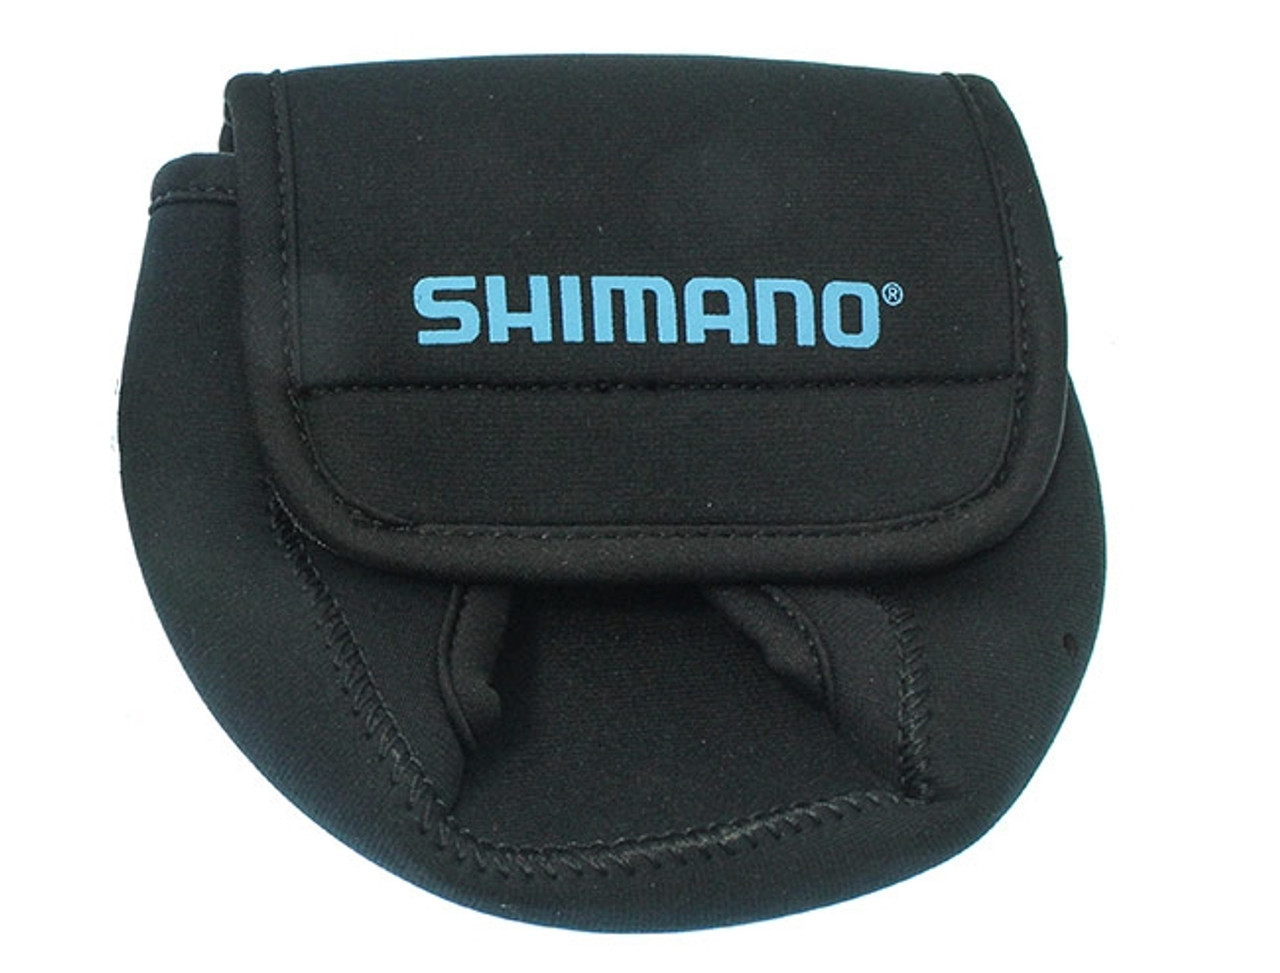 MED LG CHOOSE YOUR SIZE Shimano Neoprene Spinning Reel Covers ANSC SM 